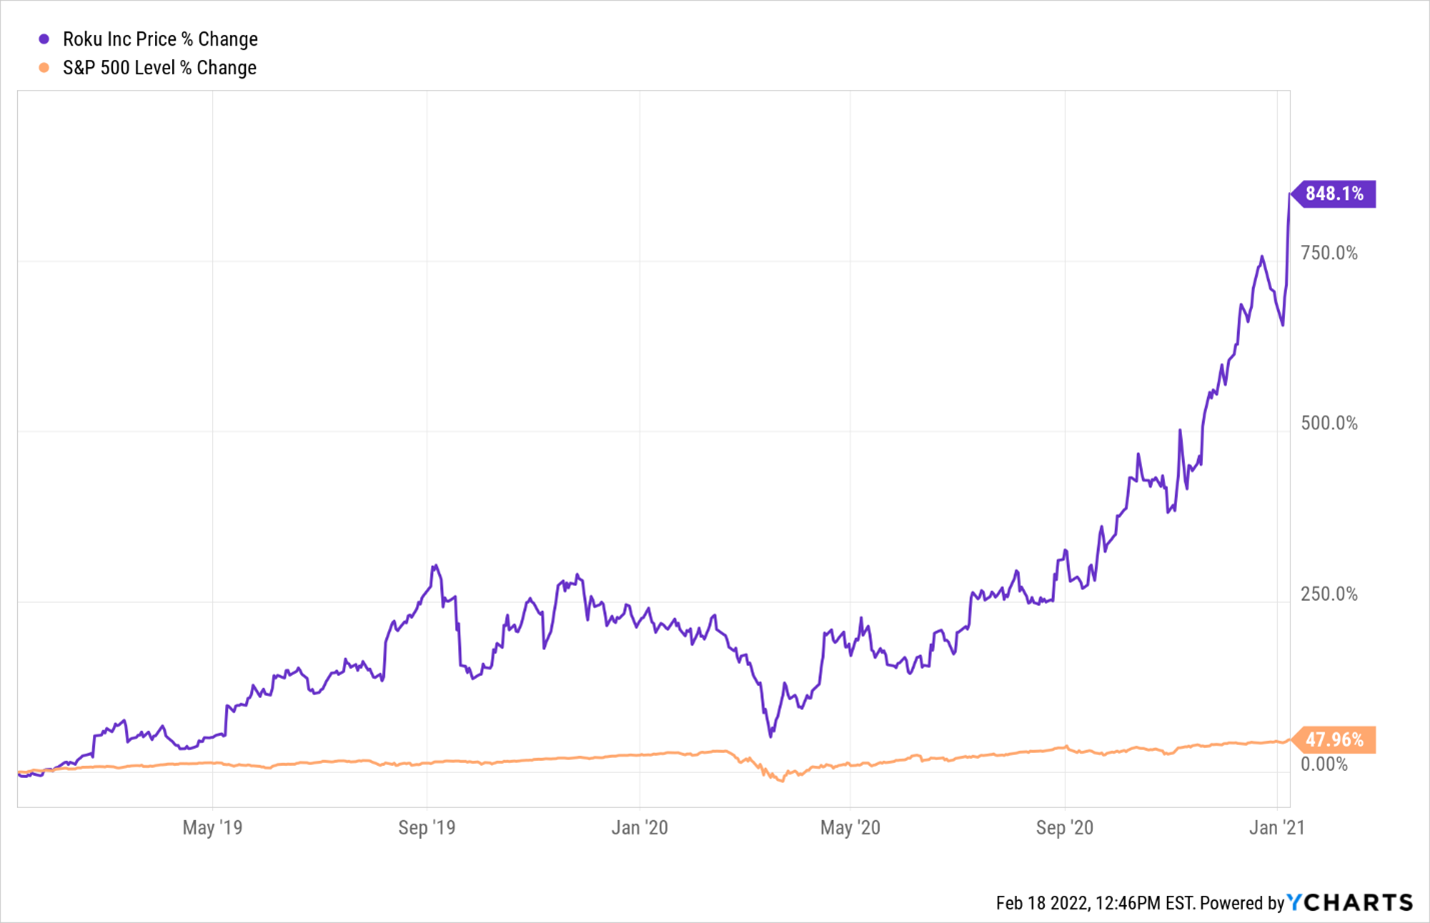 An chart of Roku stock prices from 2019 through Feb 2022